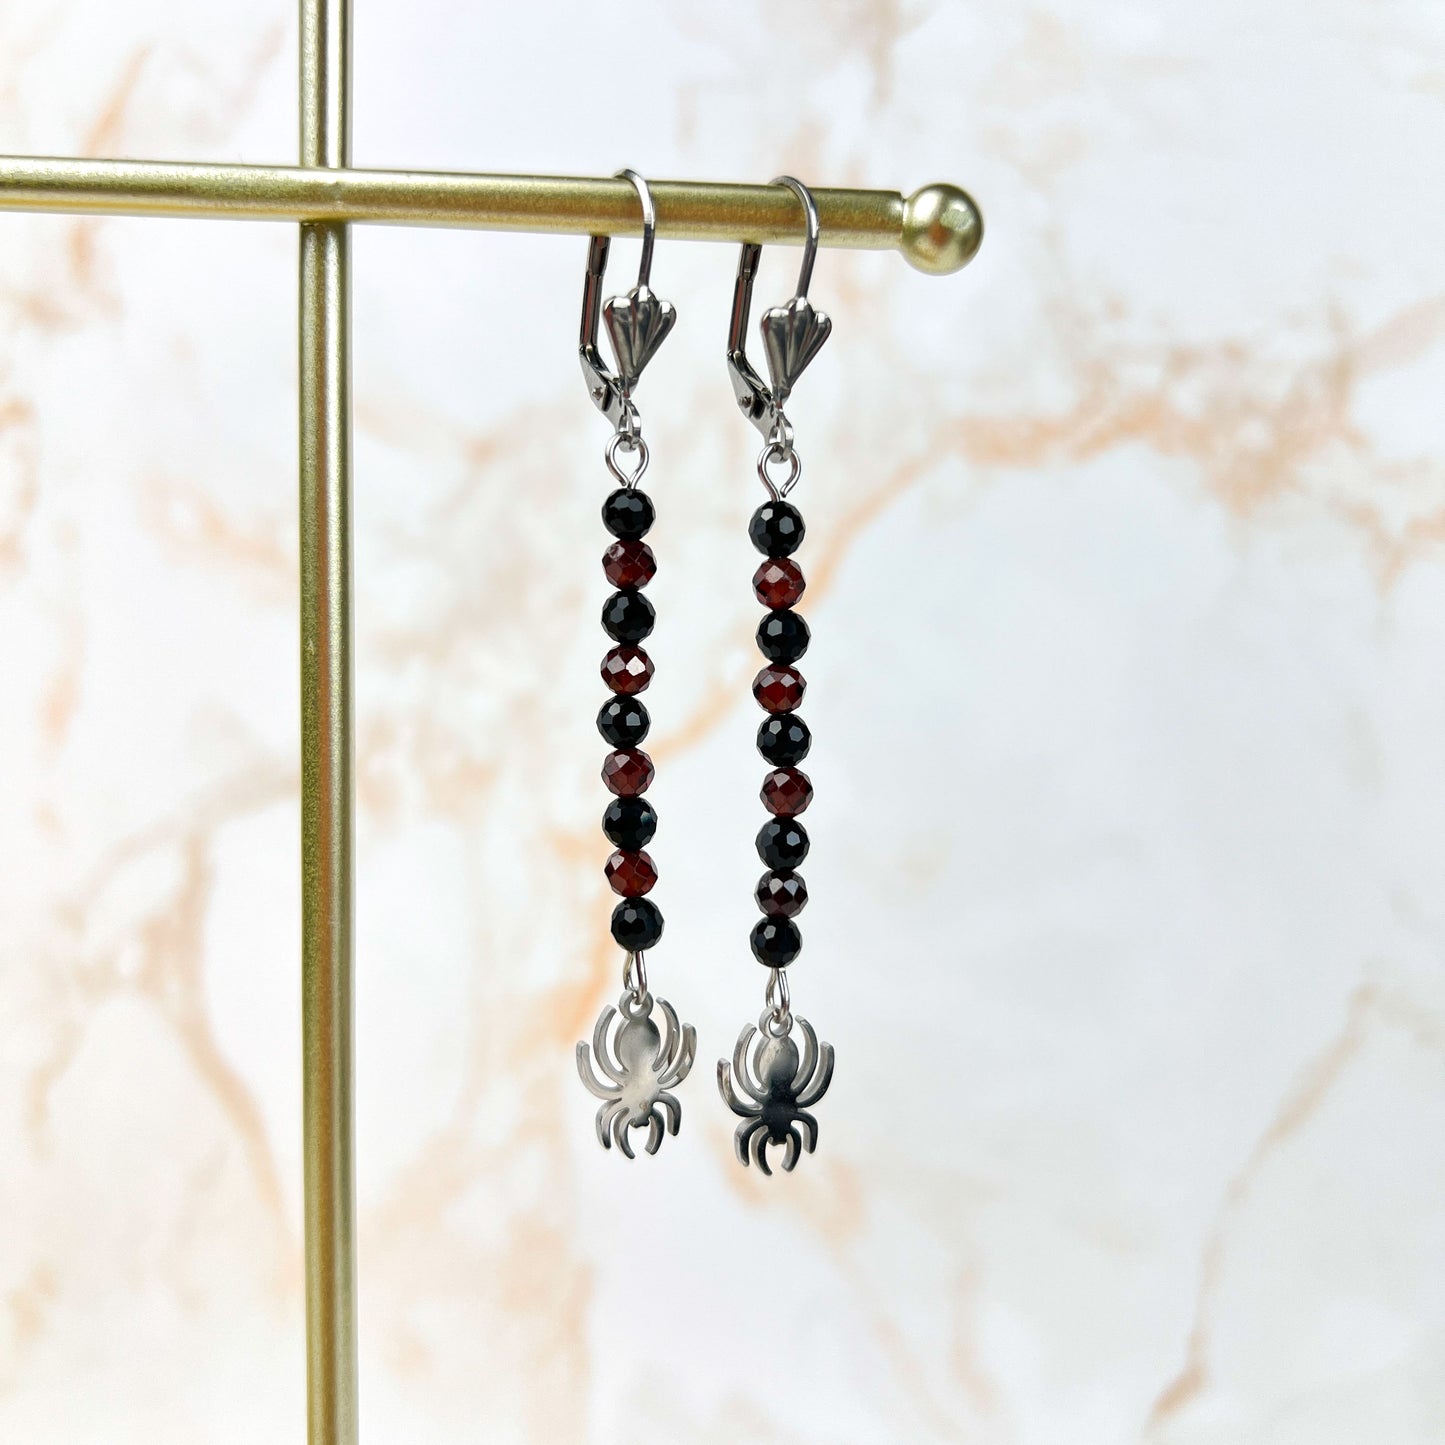 Gothic spider earrings with garnet, onyx and stainless steel elegant gothic jewelry witchy gemstone earrings